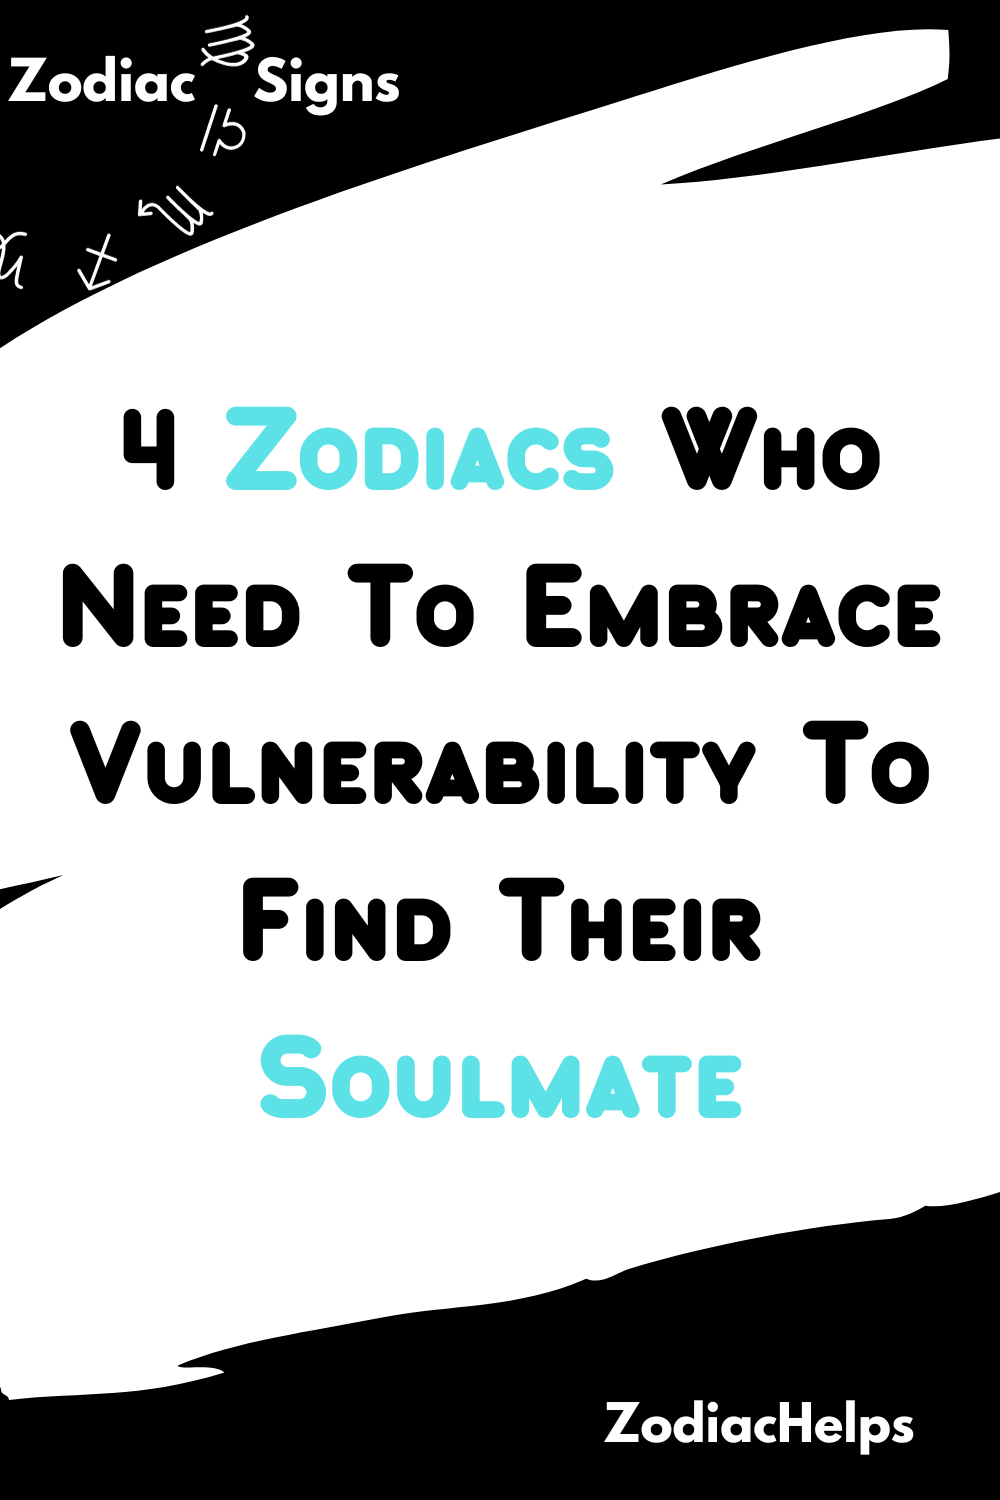 4 Zodiacs Who Need To Embrace Vulnerability To Find Their Soulmate